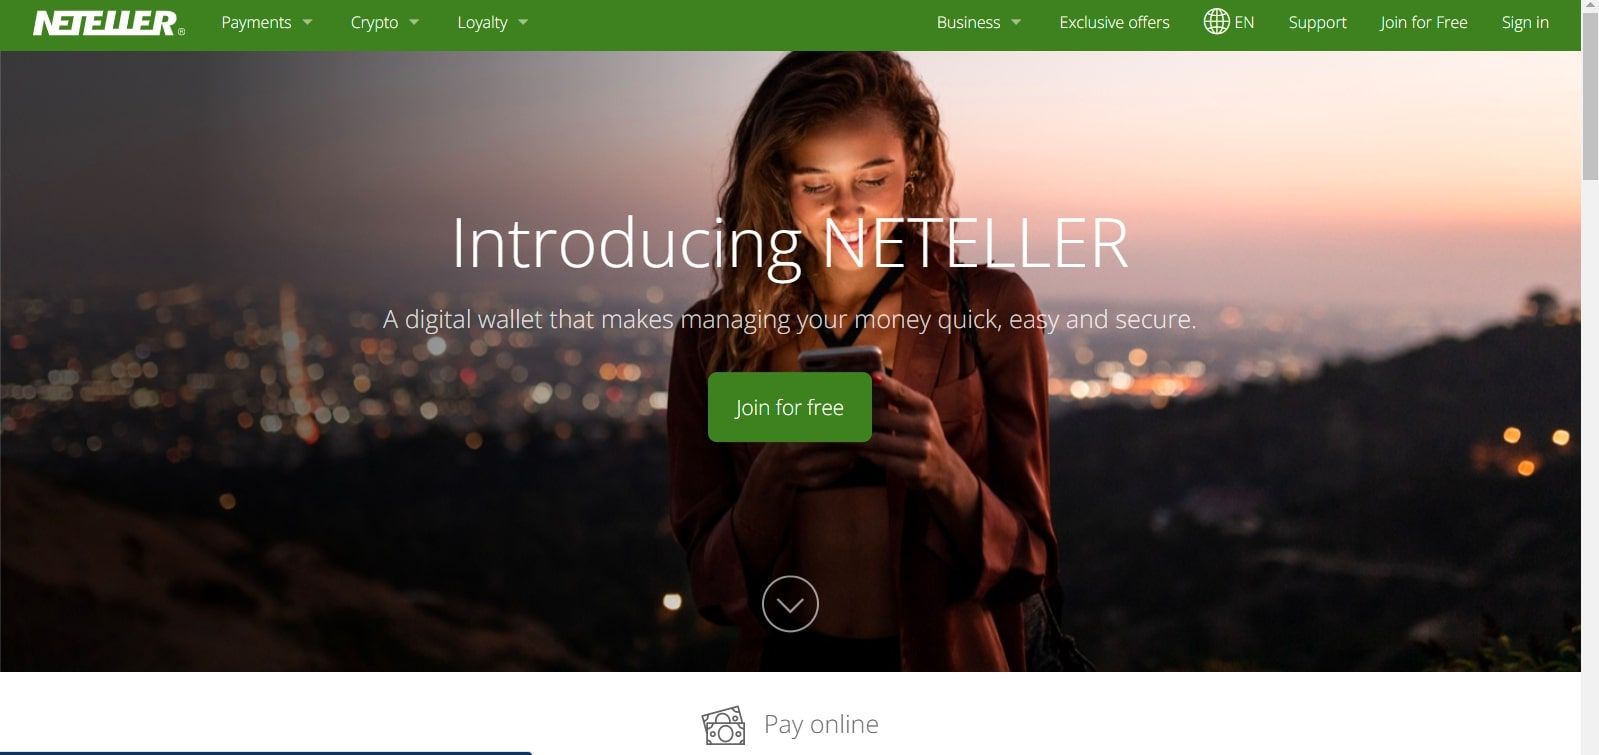 Neteller Home Page